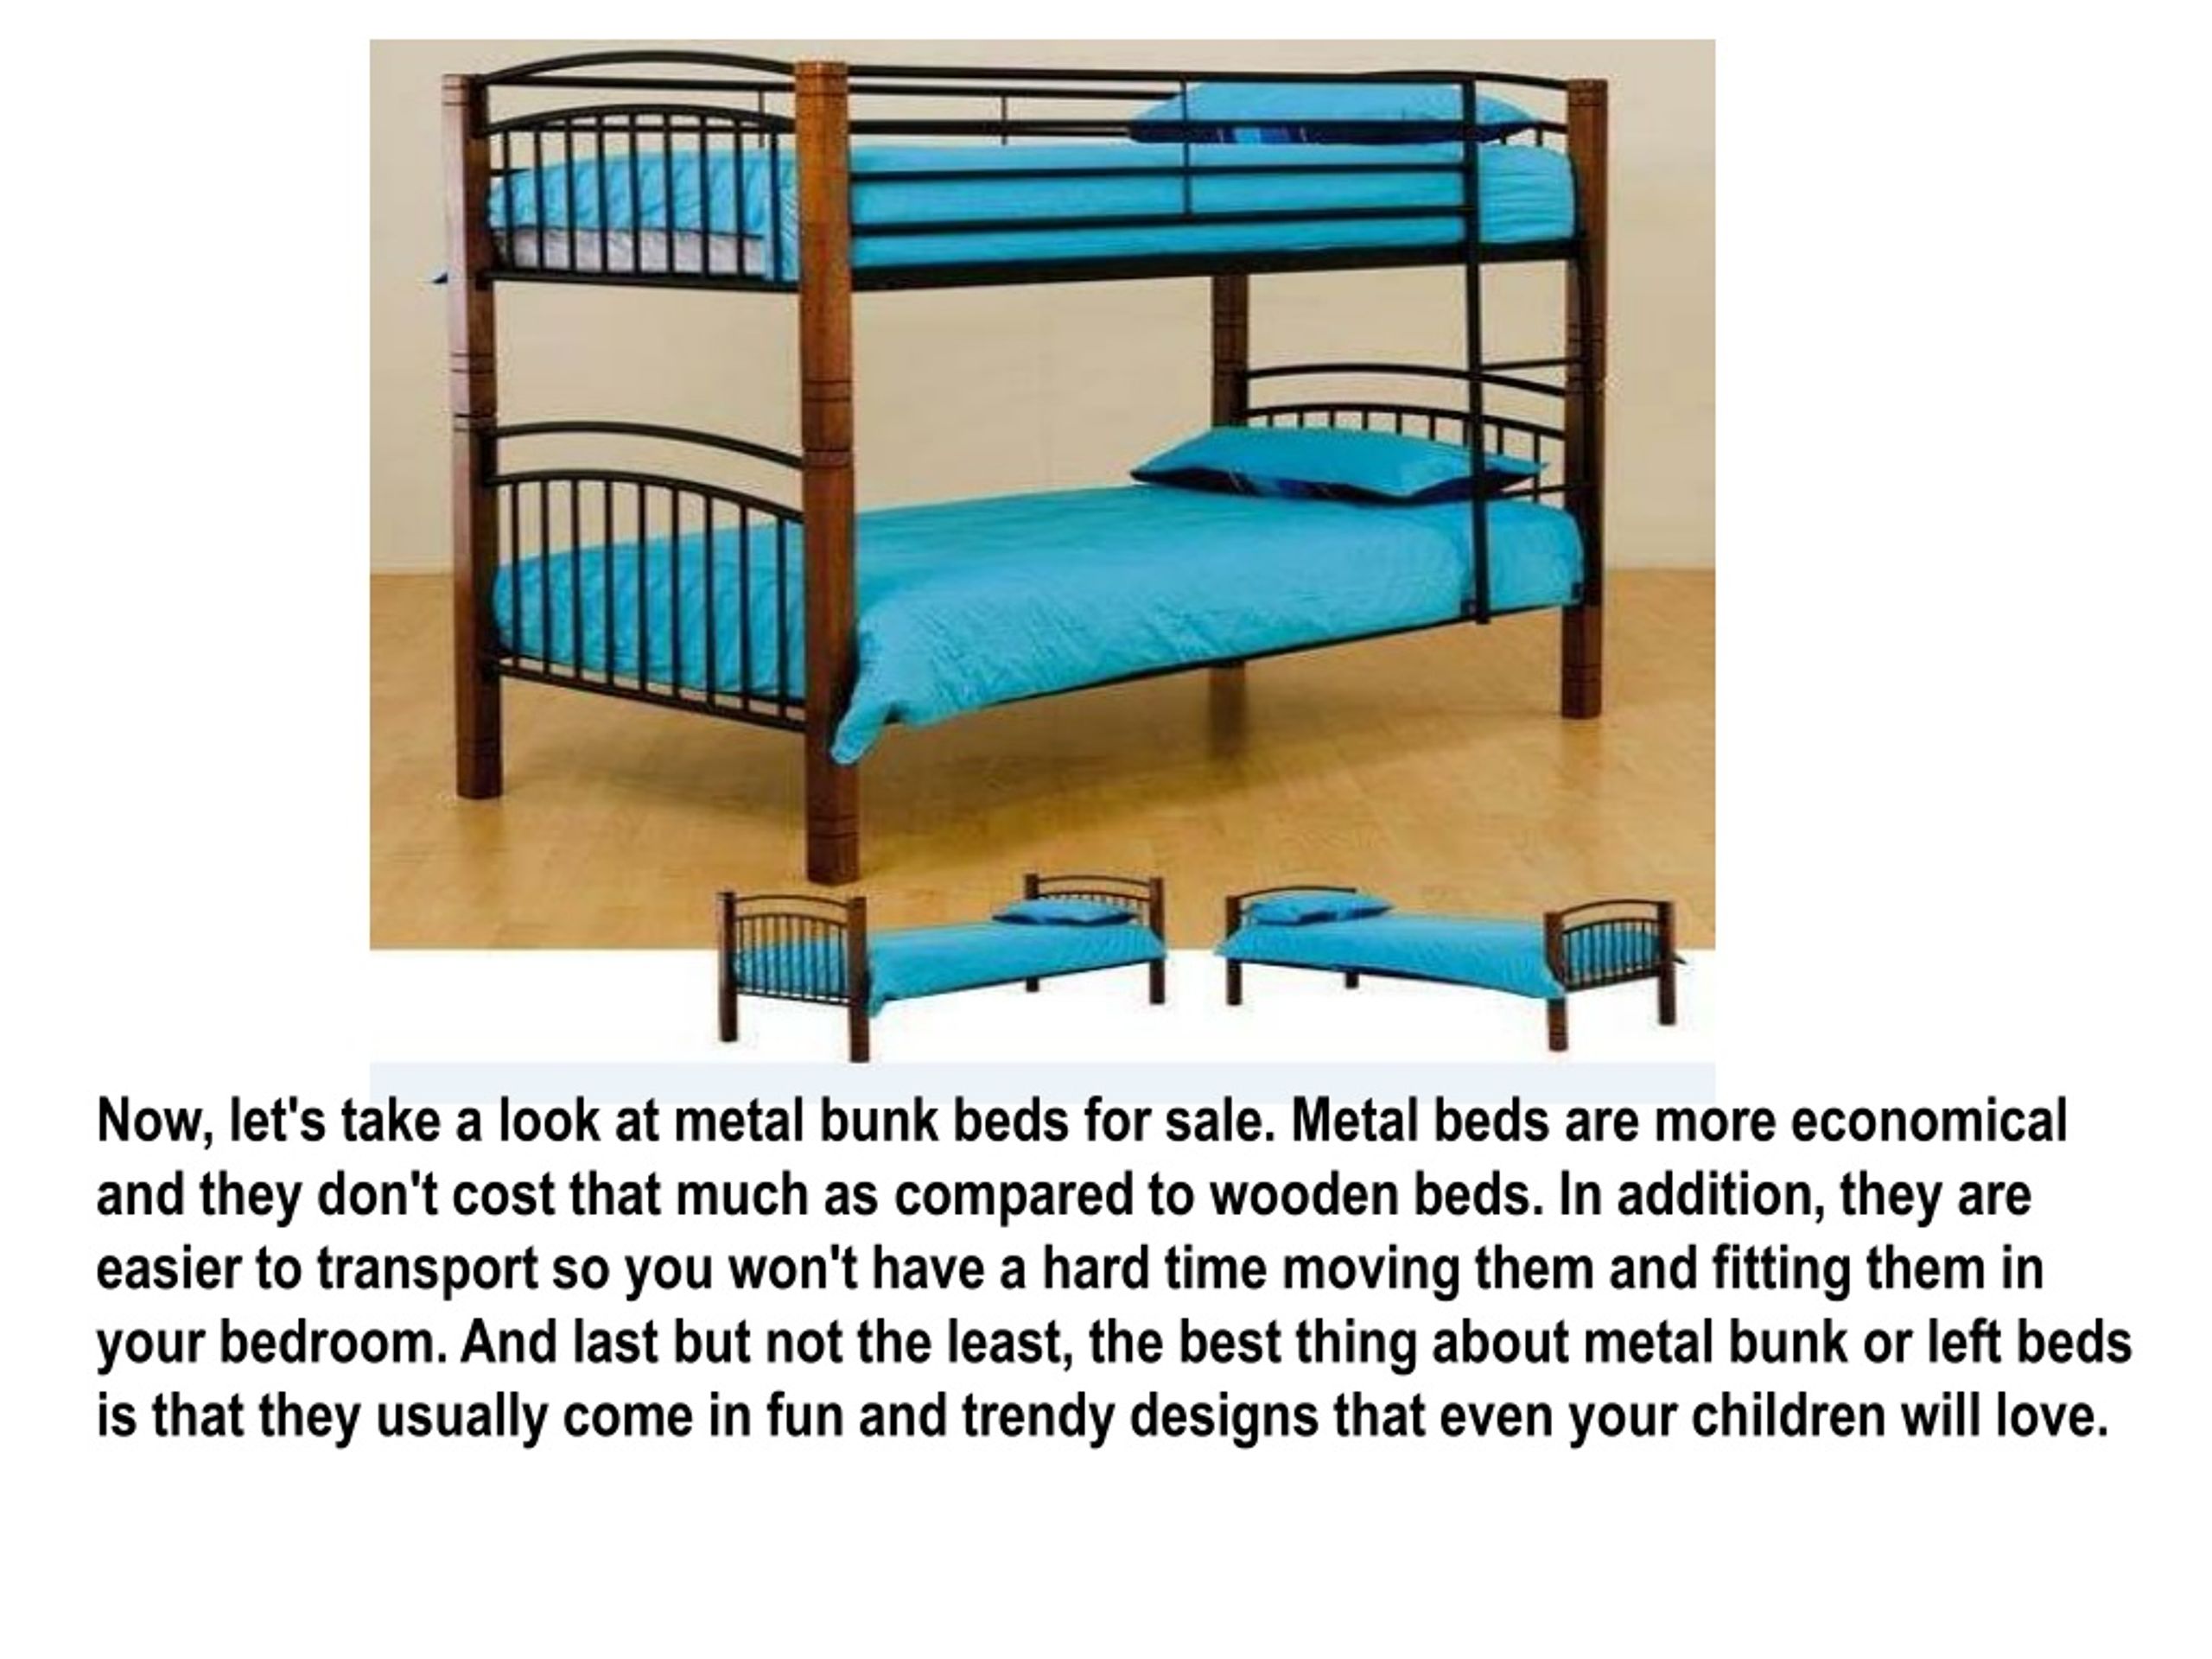 Ppt Bunk Beds For Wood Or Metal, Bunk Beds Killeen Tx